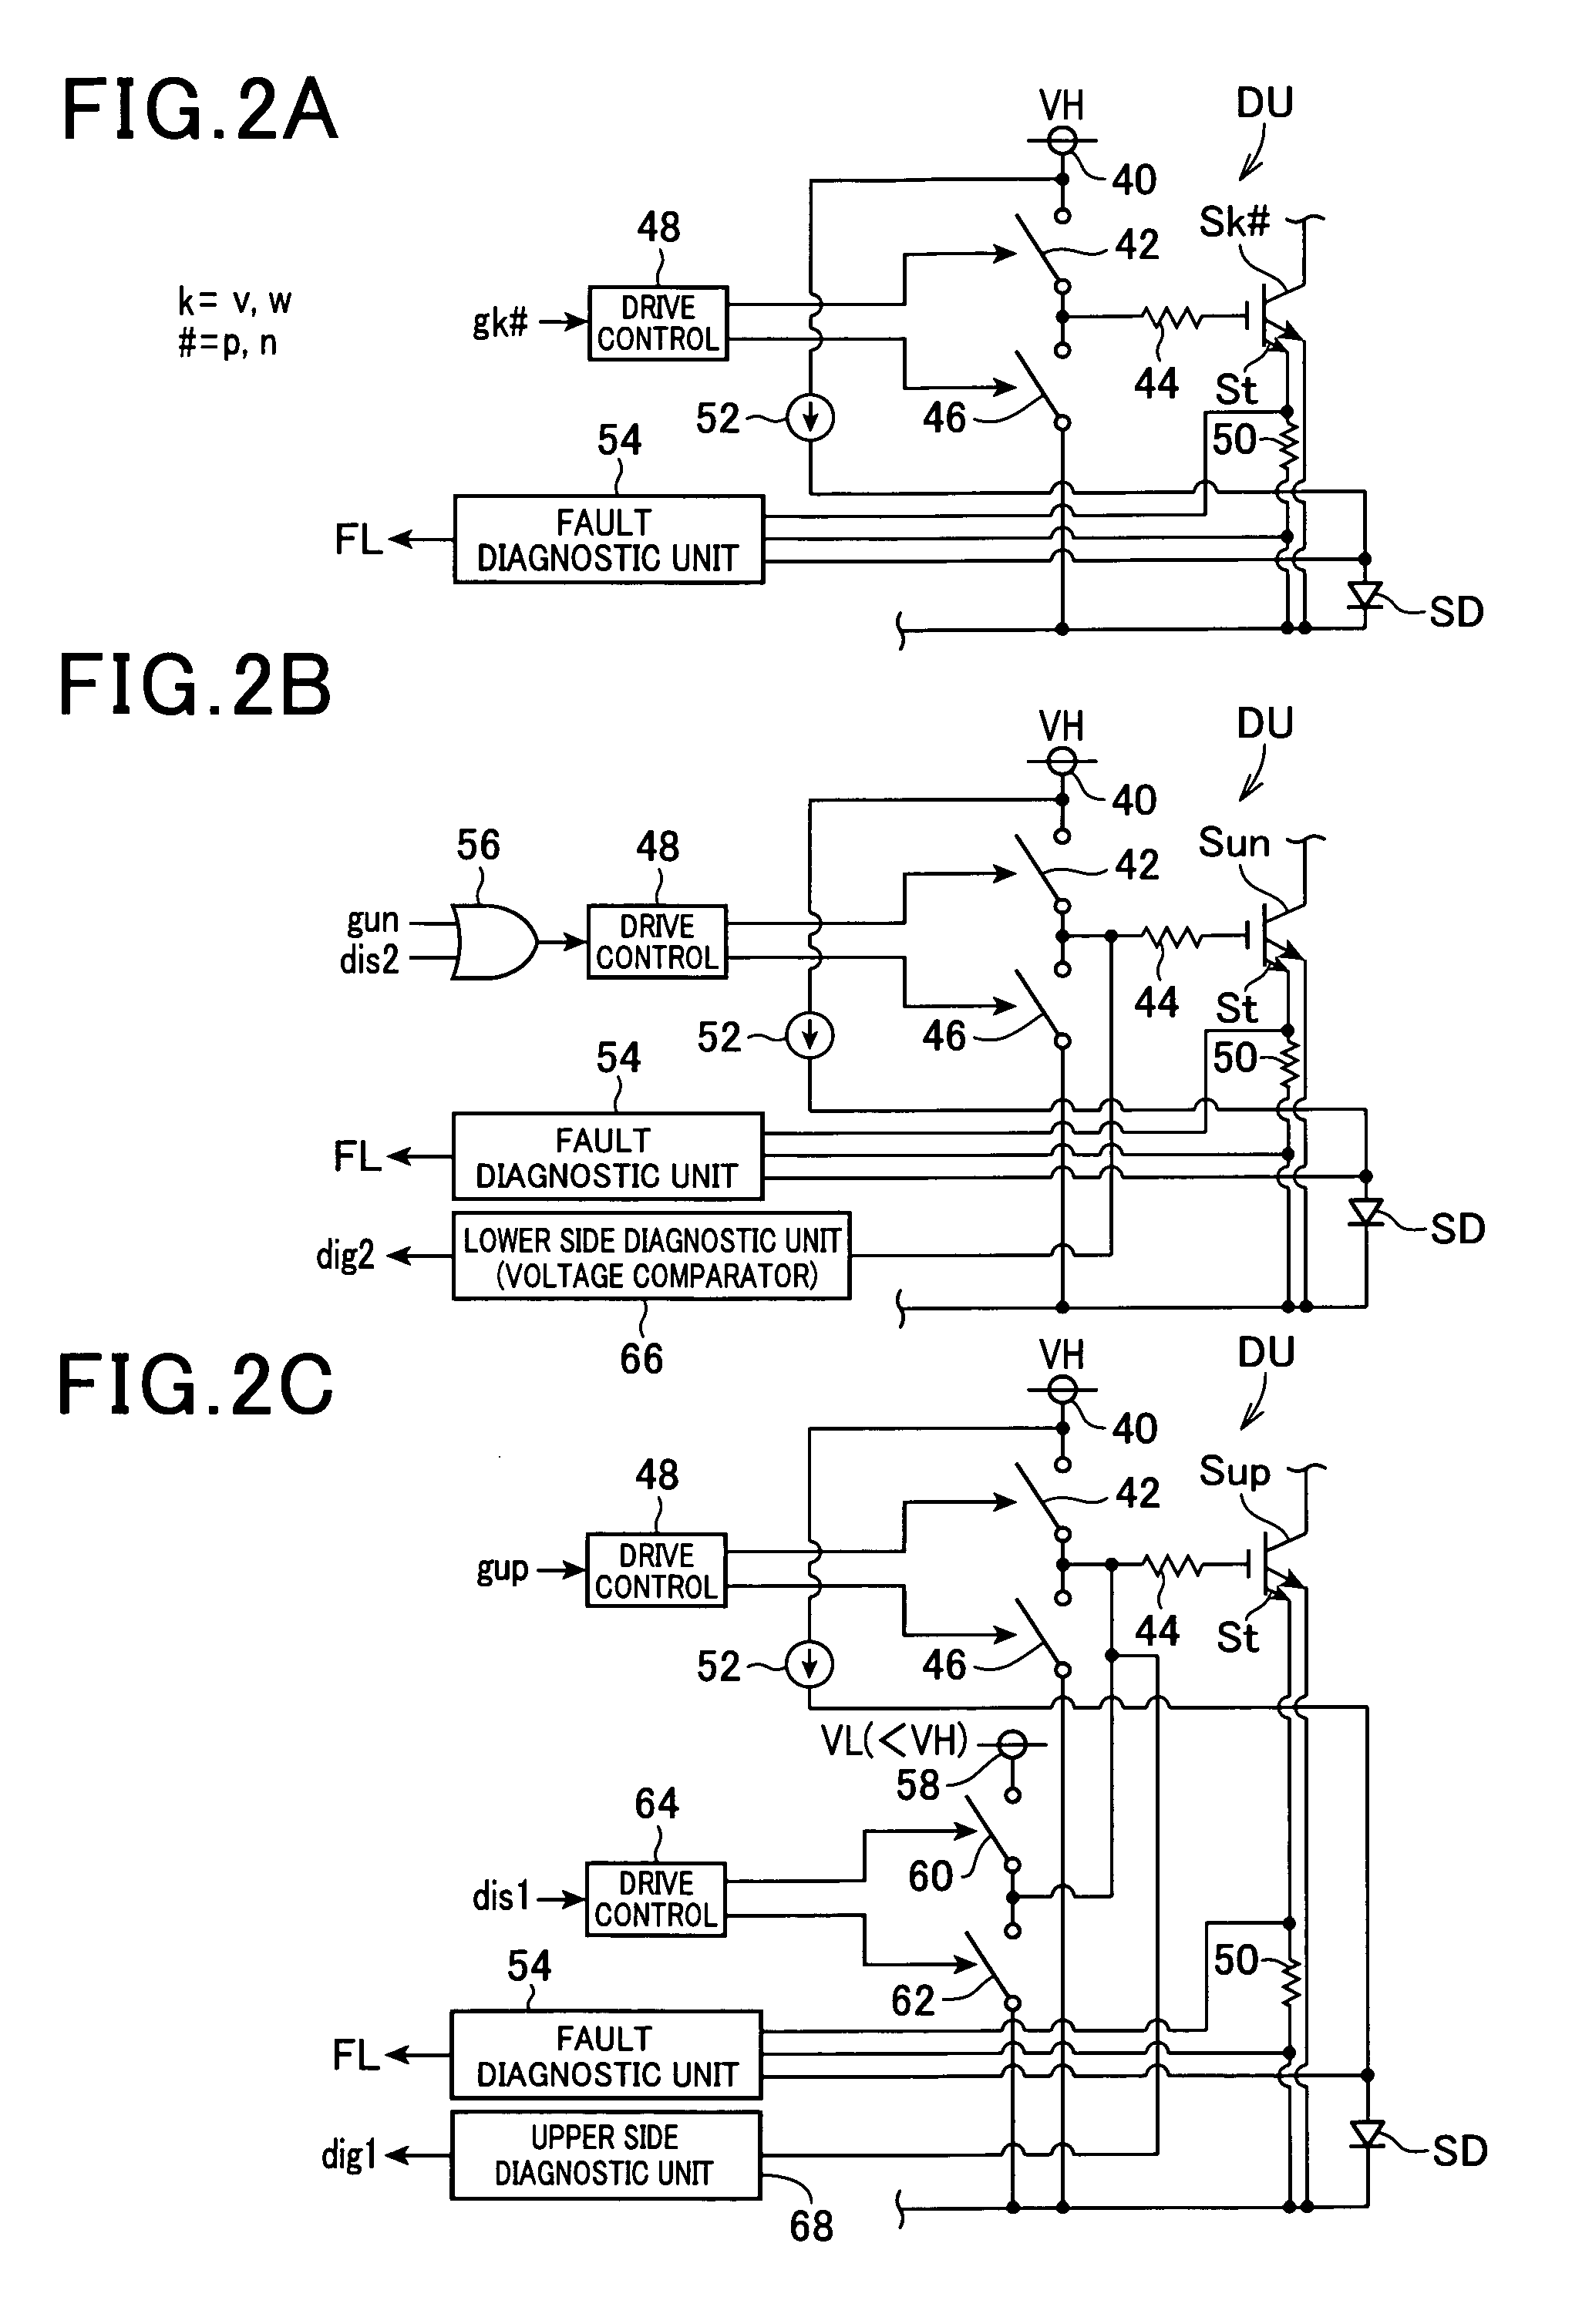 Discharge control apparatus arranged in power conversion system